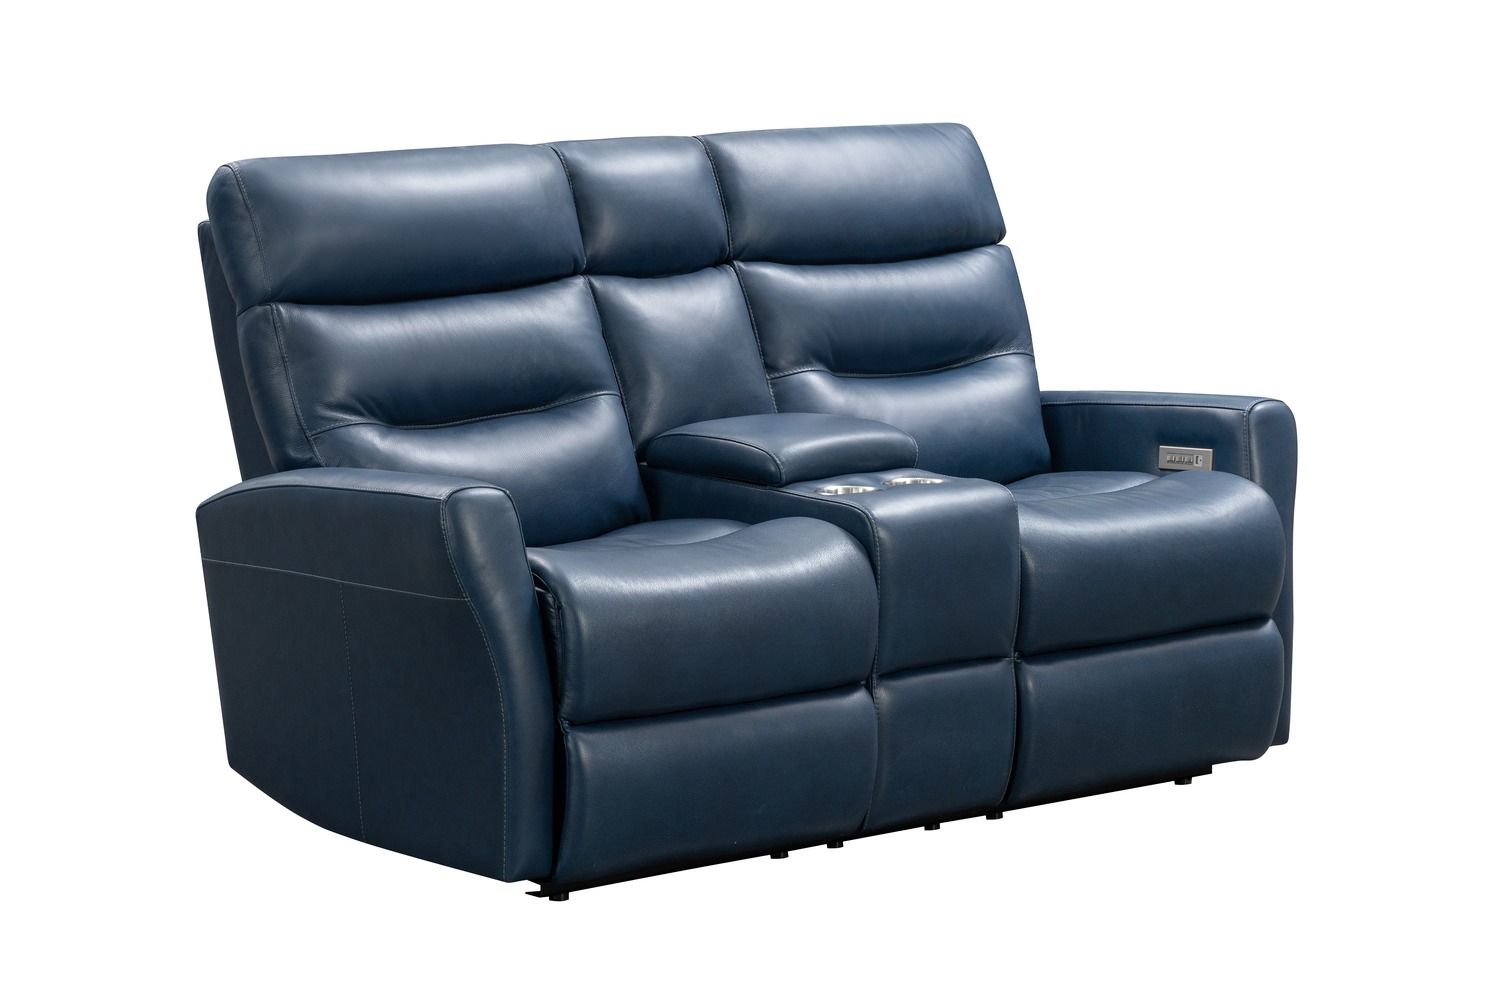 Barcalounger Enzo Power Reclining Console Loveseat with Power Head Rests and Power Lumbar - Marco Navy Blue/Leather Match